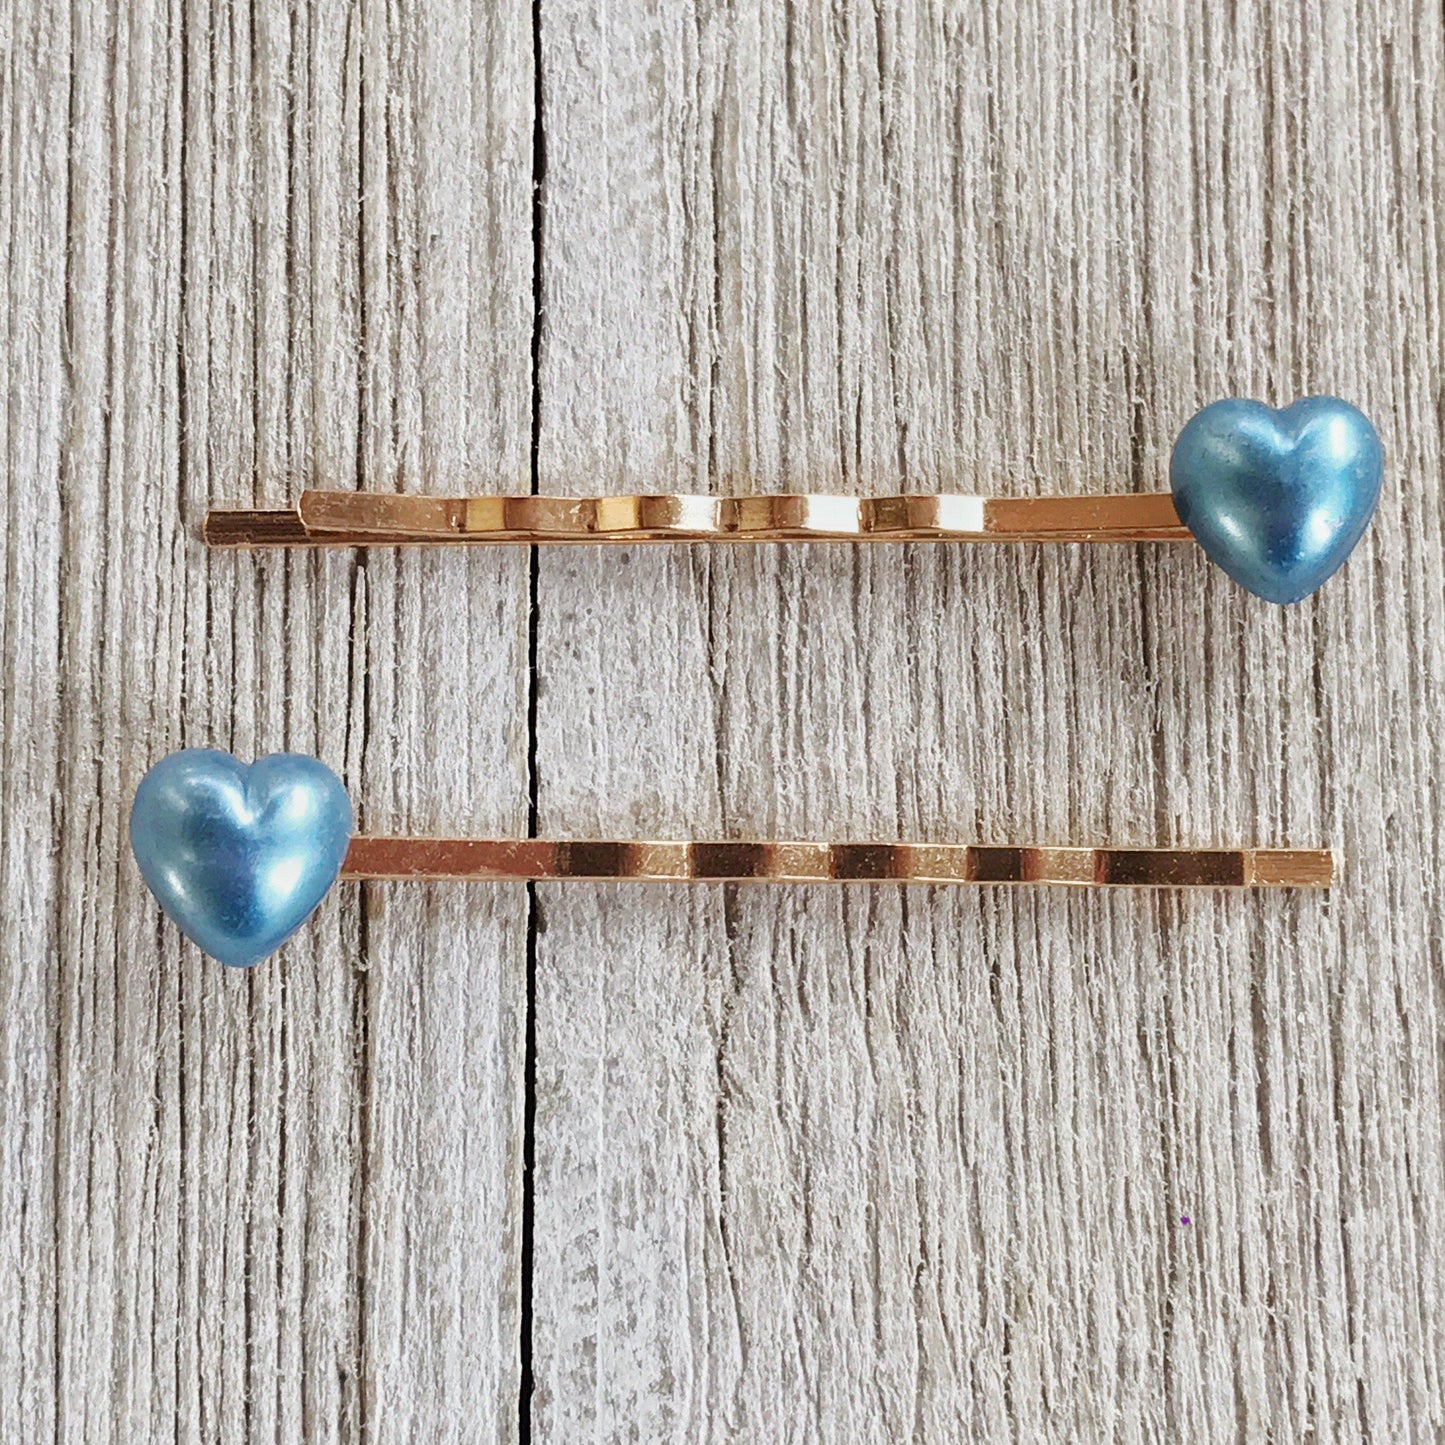 Blue Heart Hair Pins - Women’s Bobby Pins with Cute and Decorative Design